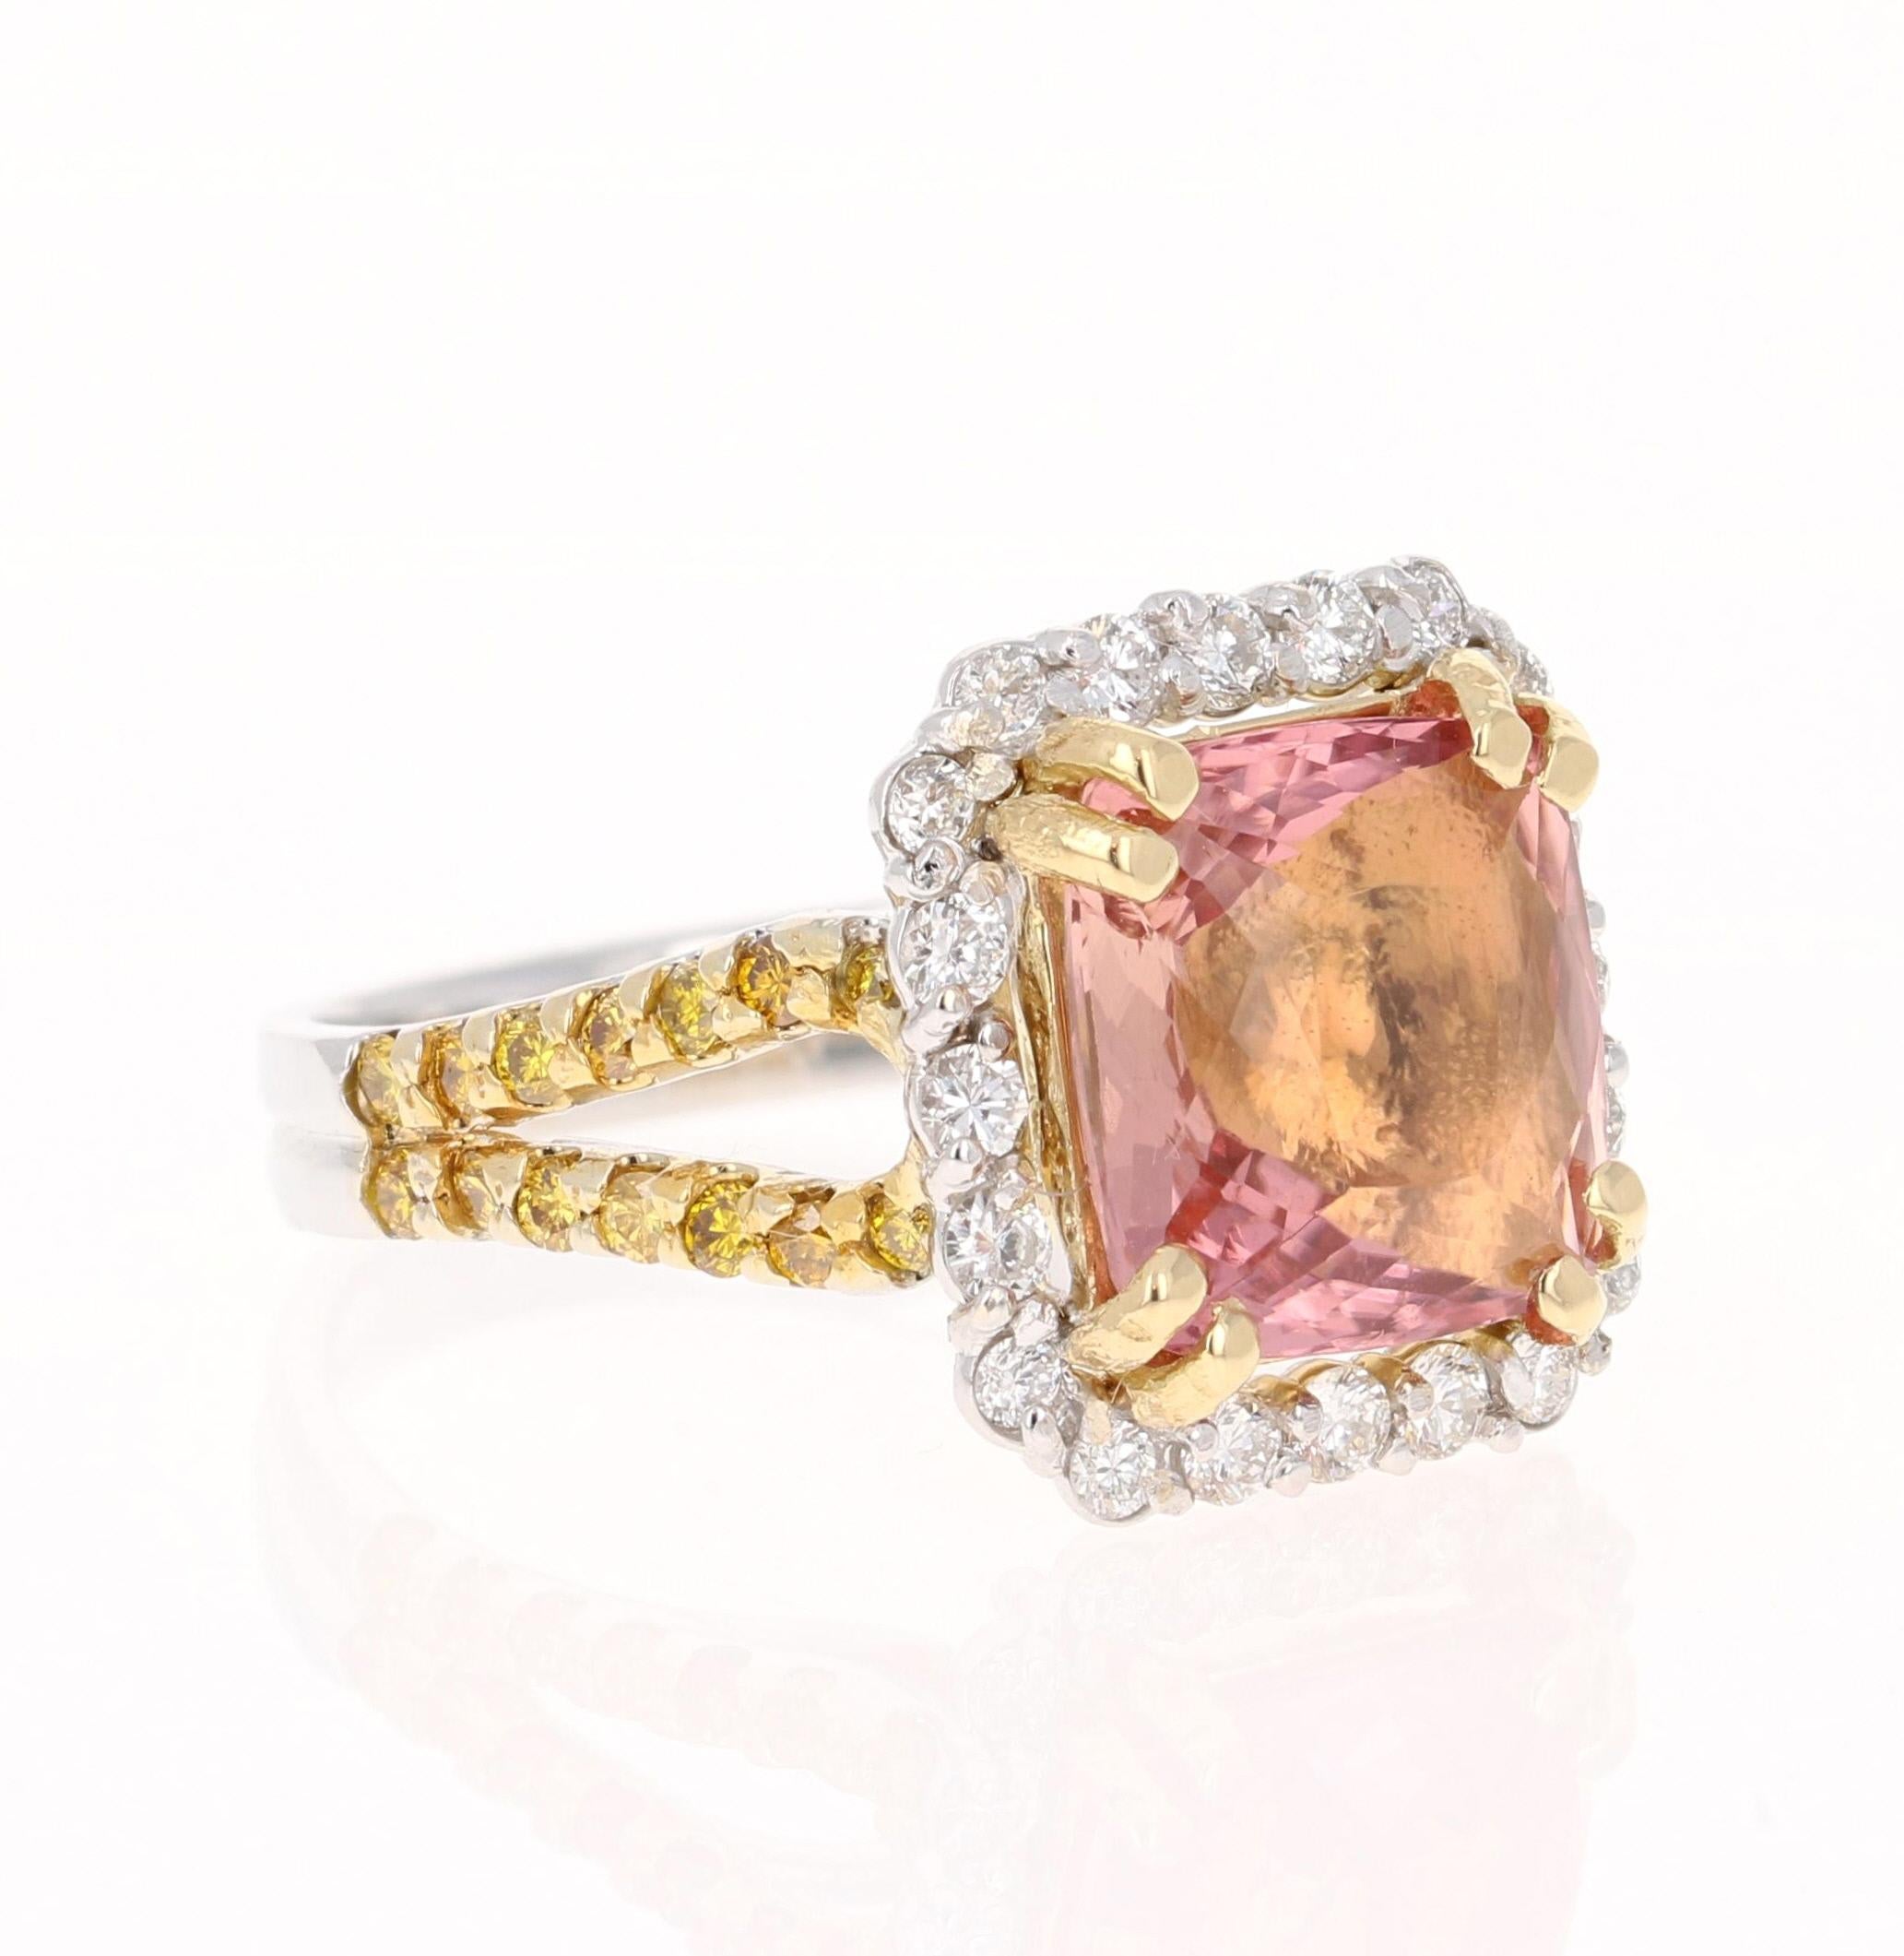 A unique beauty that is sure to be a rare piece! 

This stunner has a gorgeous Square Cushion Cut Tourmaline that weighs 4.77 Carats. It is surrounded by 20 Round Cut Diamonds that weigh 0.50 Carats (Clarity: VS, Color: H) It is also embellished